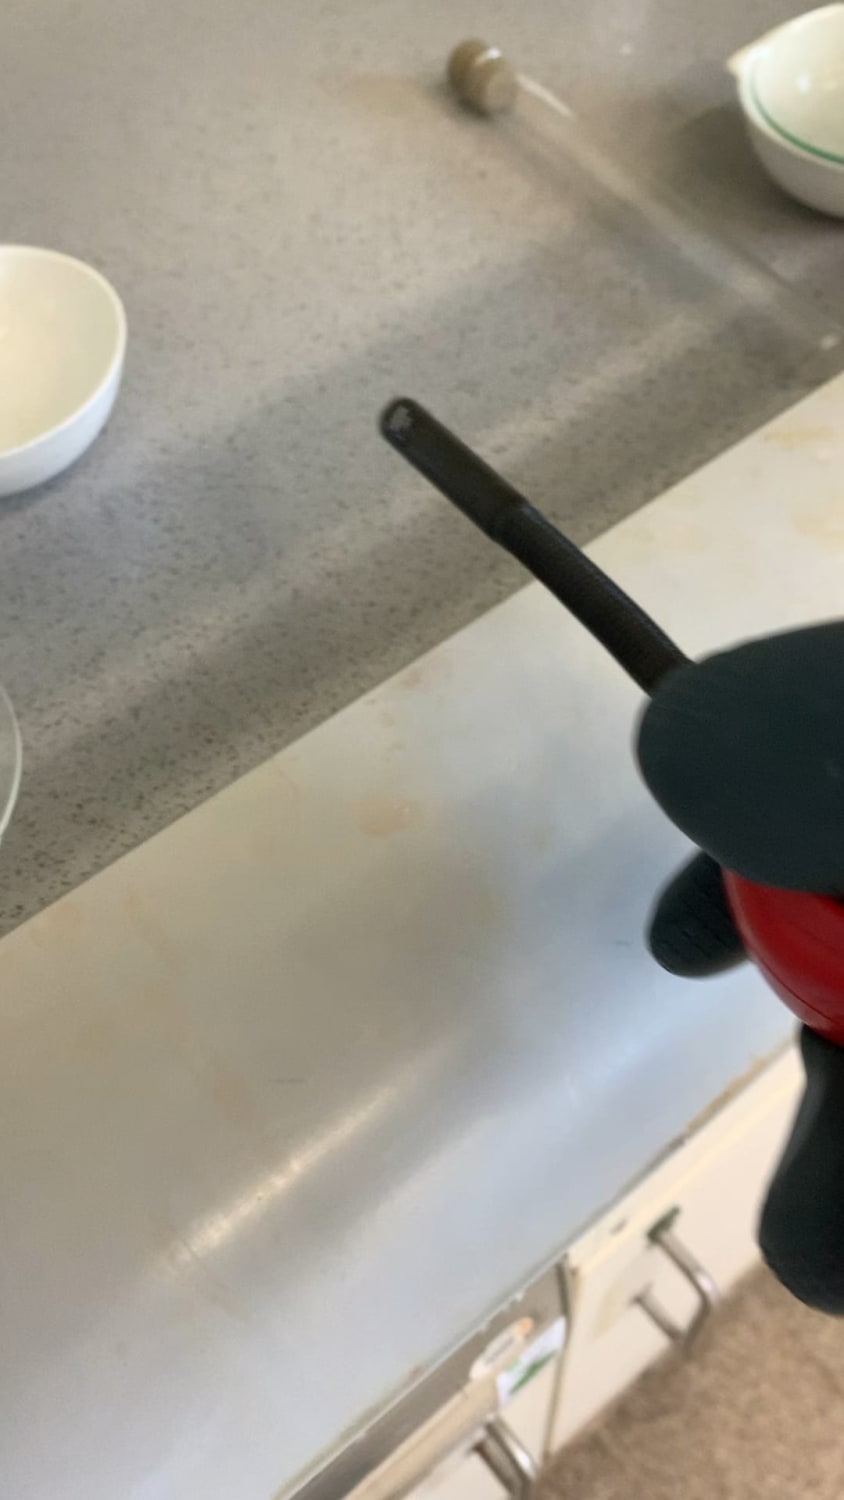 Witchfire test, test for borate-salts or boric acid by burning the trimethylester of boric acid. (Yes I kinda screwed up getting the conc. H2SO4)